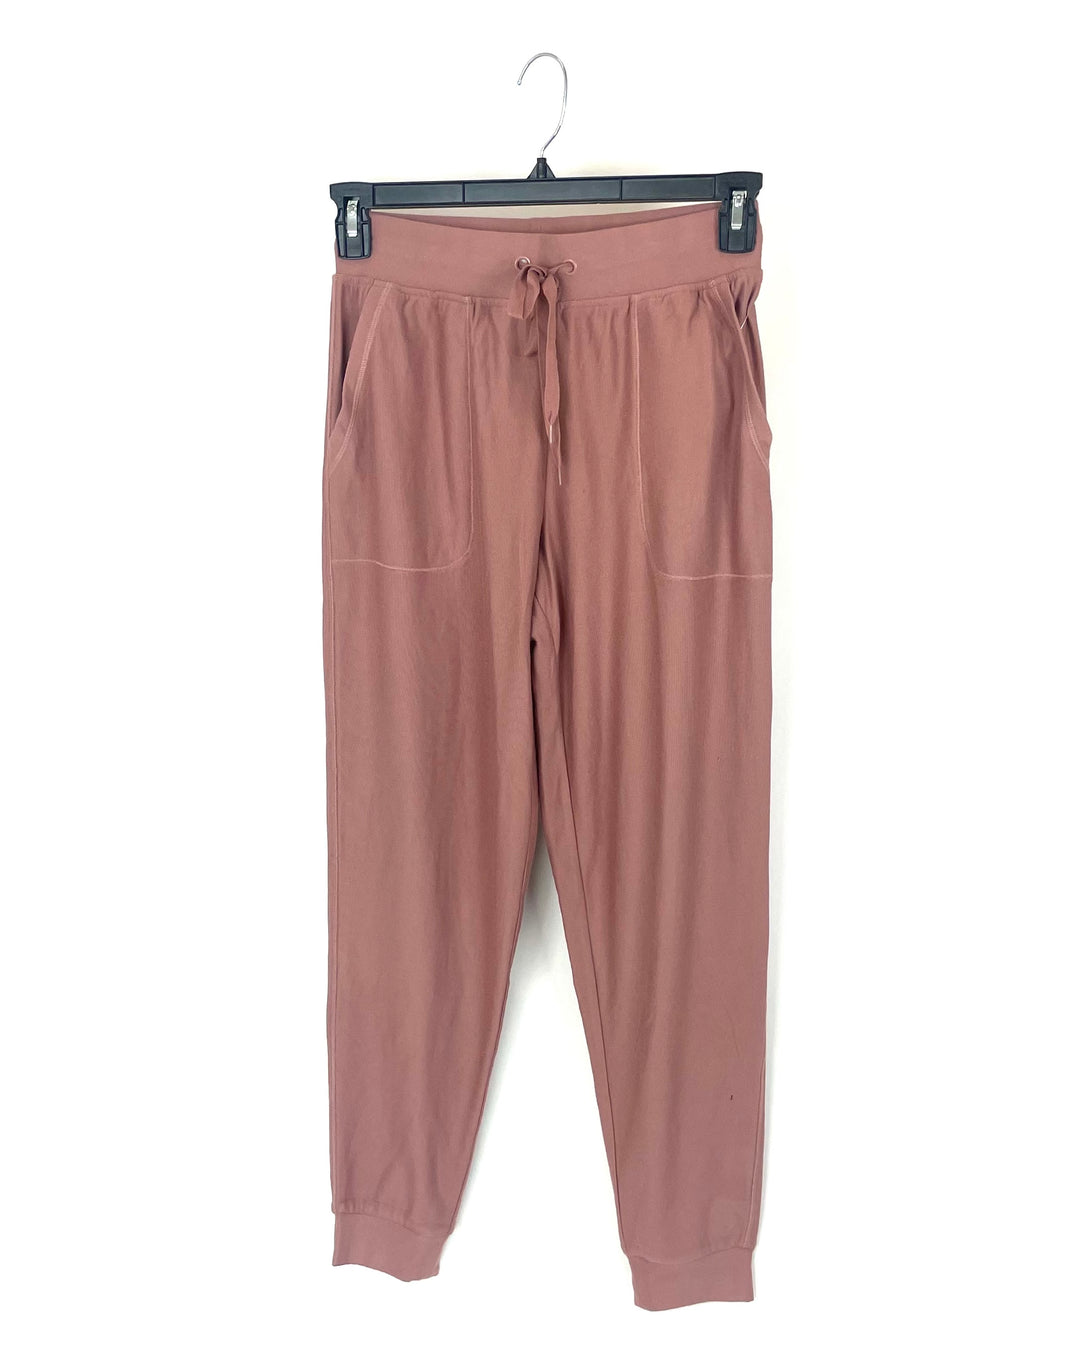 Extra Soft Pink Joggers - Size 2-4